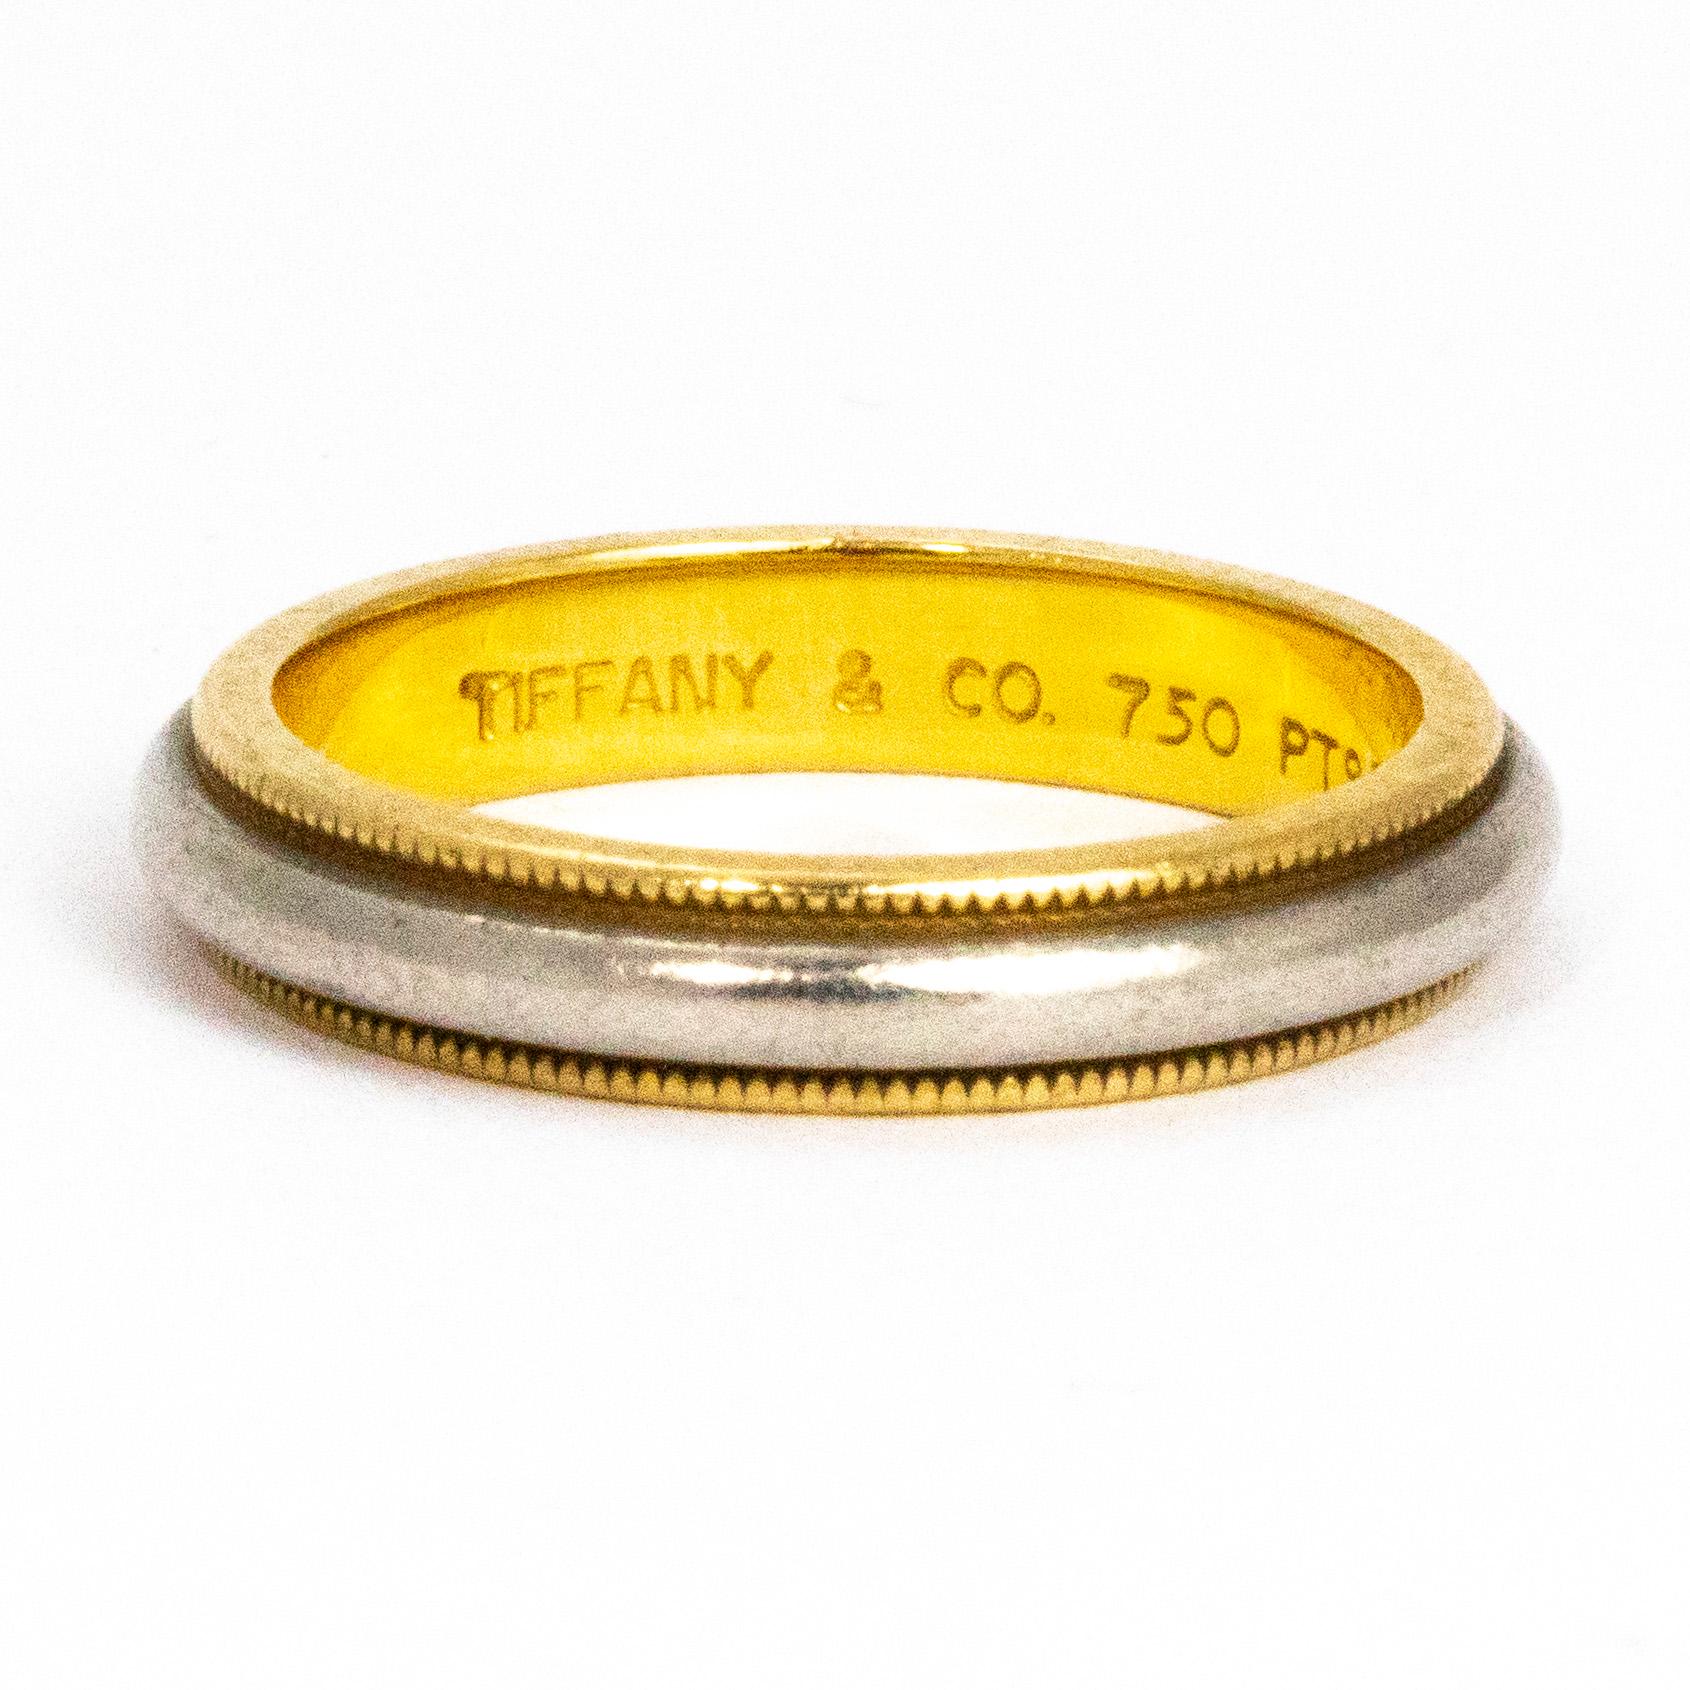 This gorgeous Tiffany & Co band is modelled out of 18ct gold and platinum. The smooth platinum band sits on top of the 18ct gold band with milgrain detail. The mix of the two tone metals give a very stylish feel to the ring. On the inner side of the